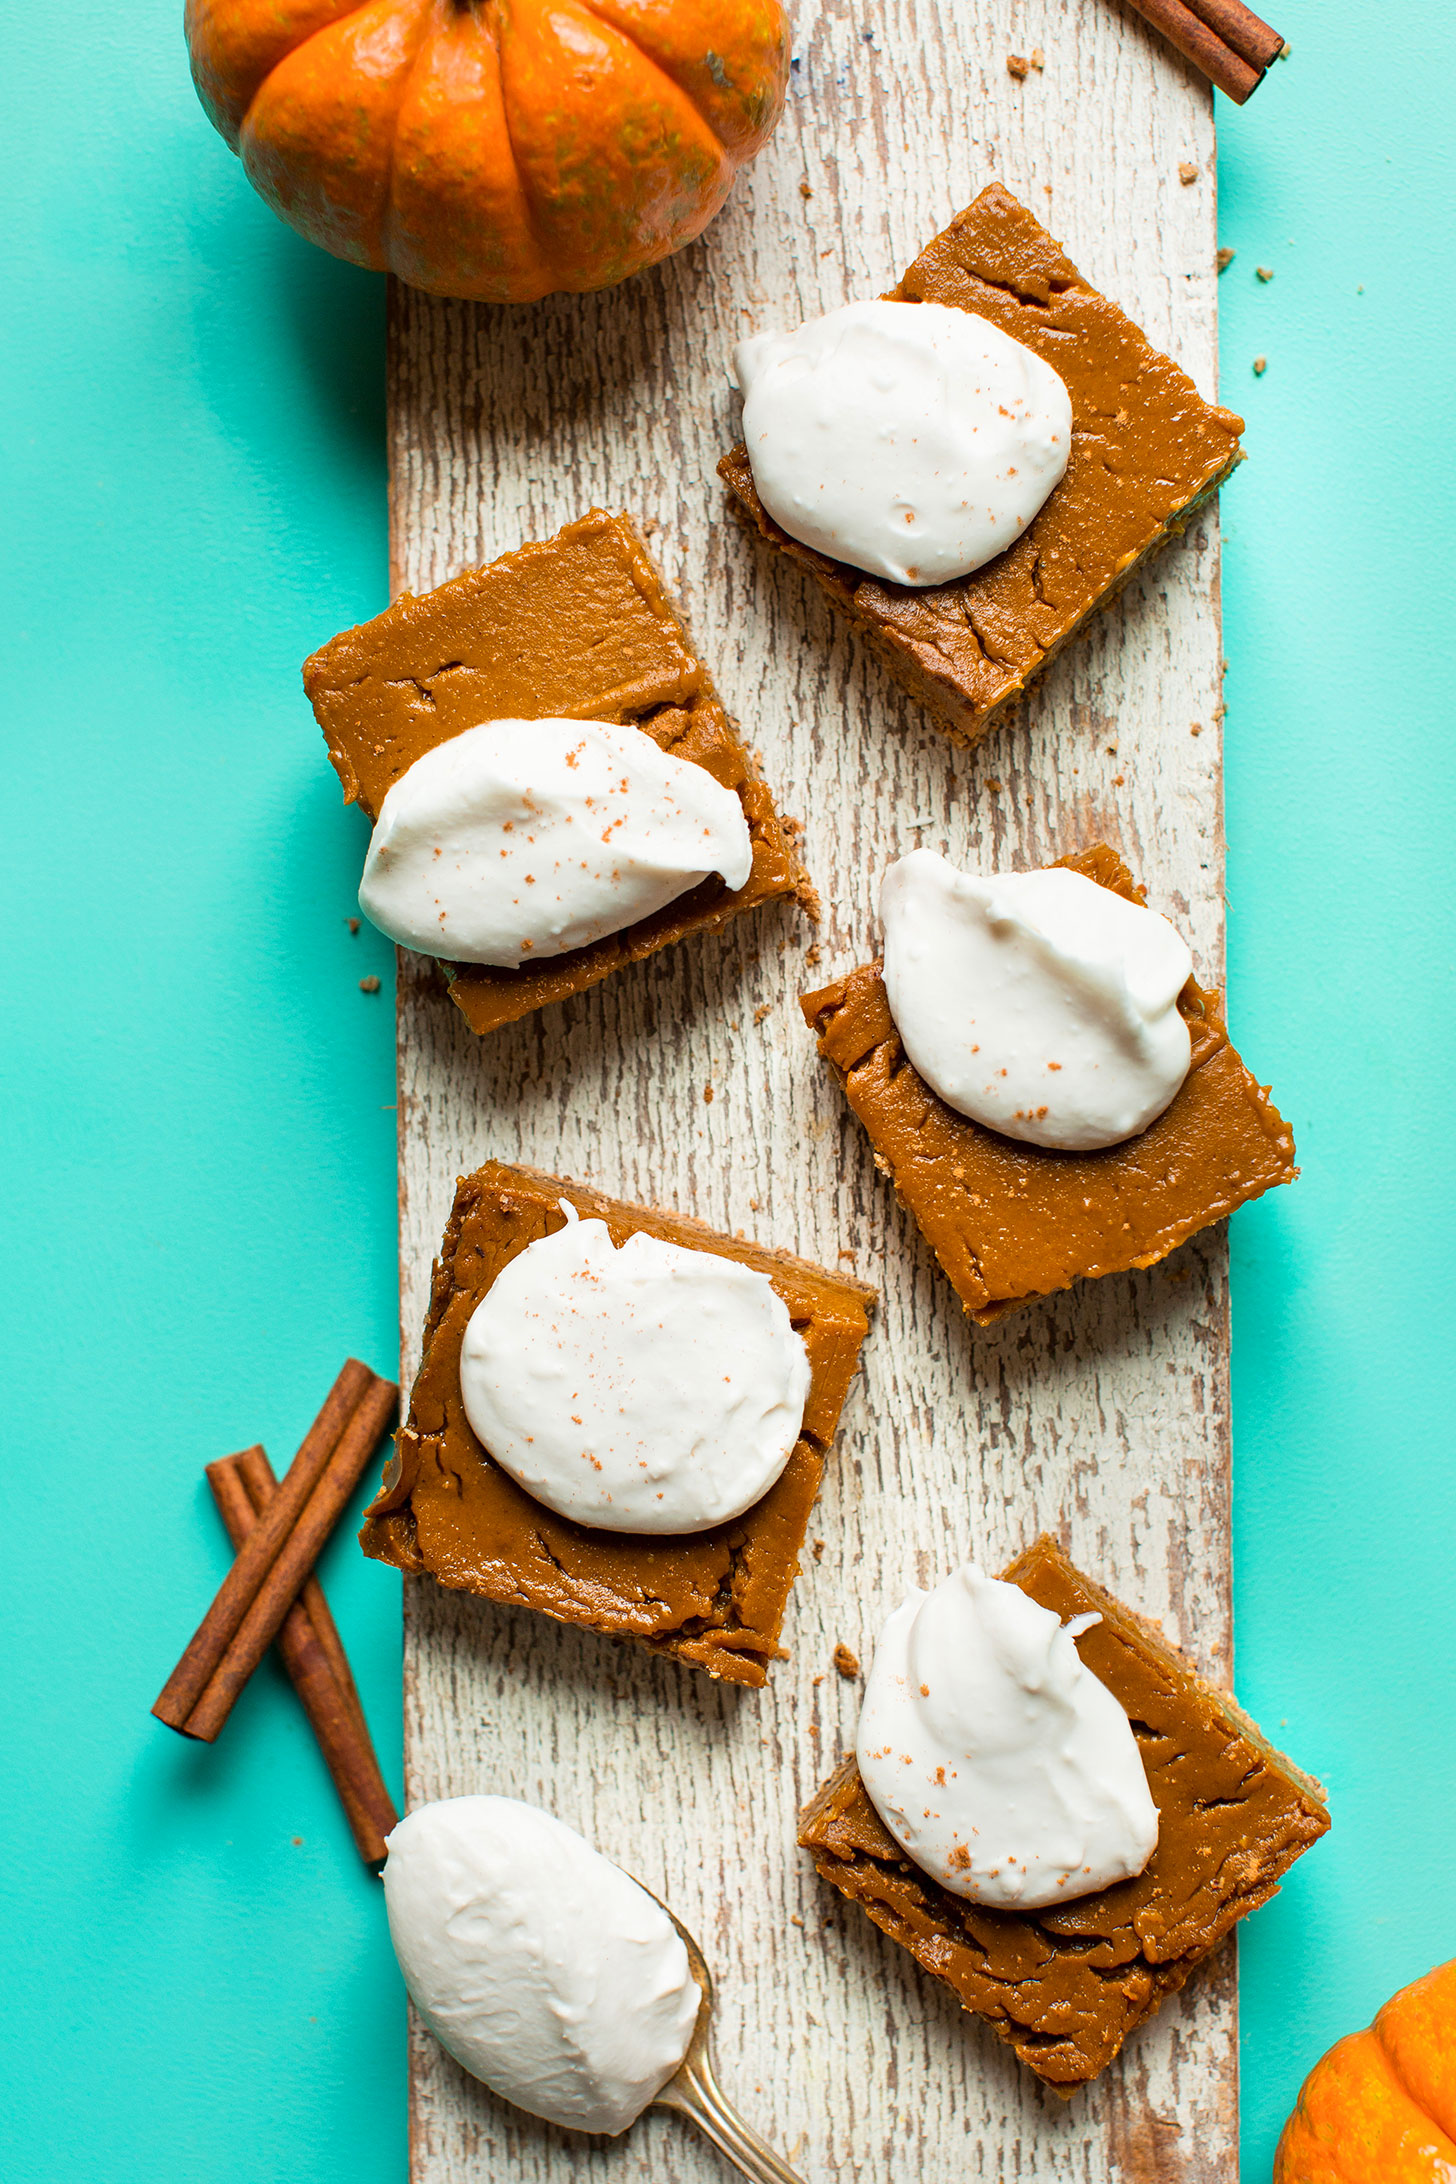 Wood plank with gluten-free vegan Pumpkin Pie Bars topped with coconut whipped cream